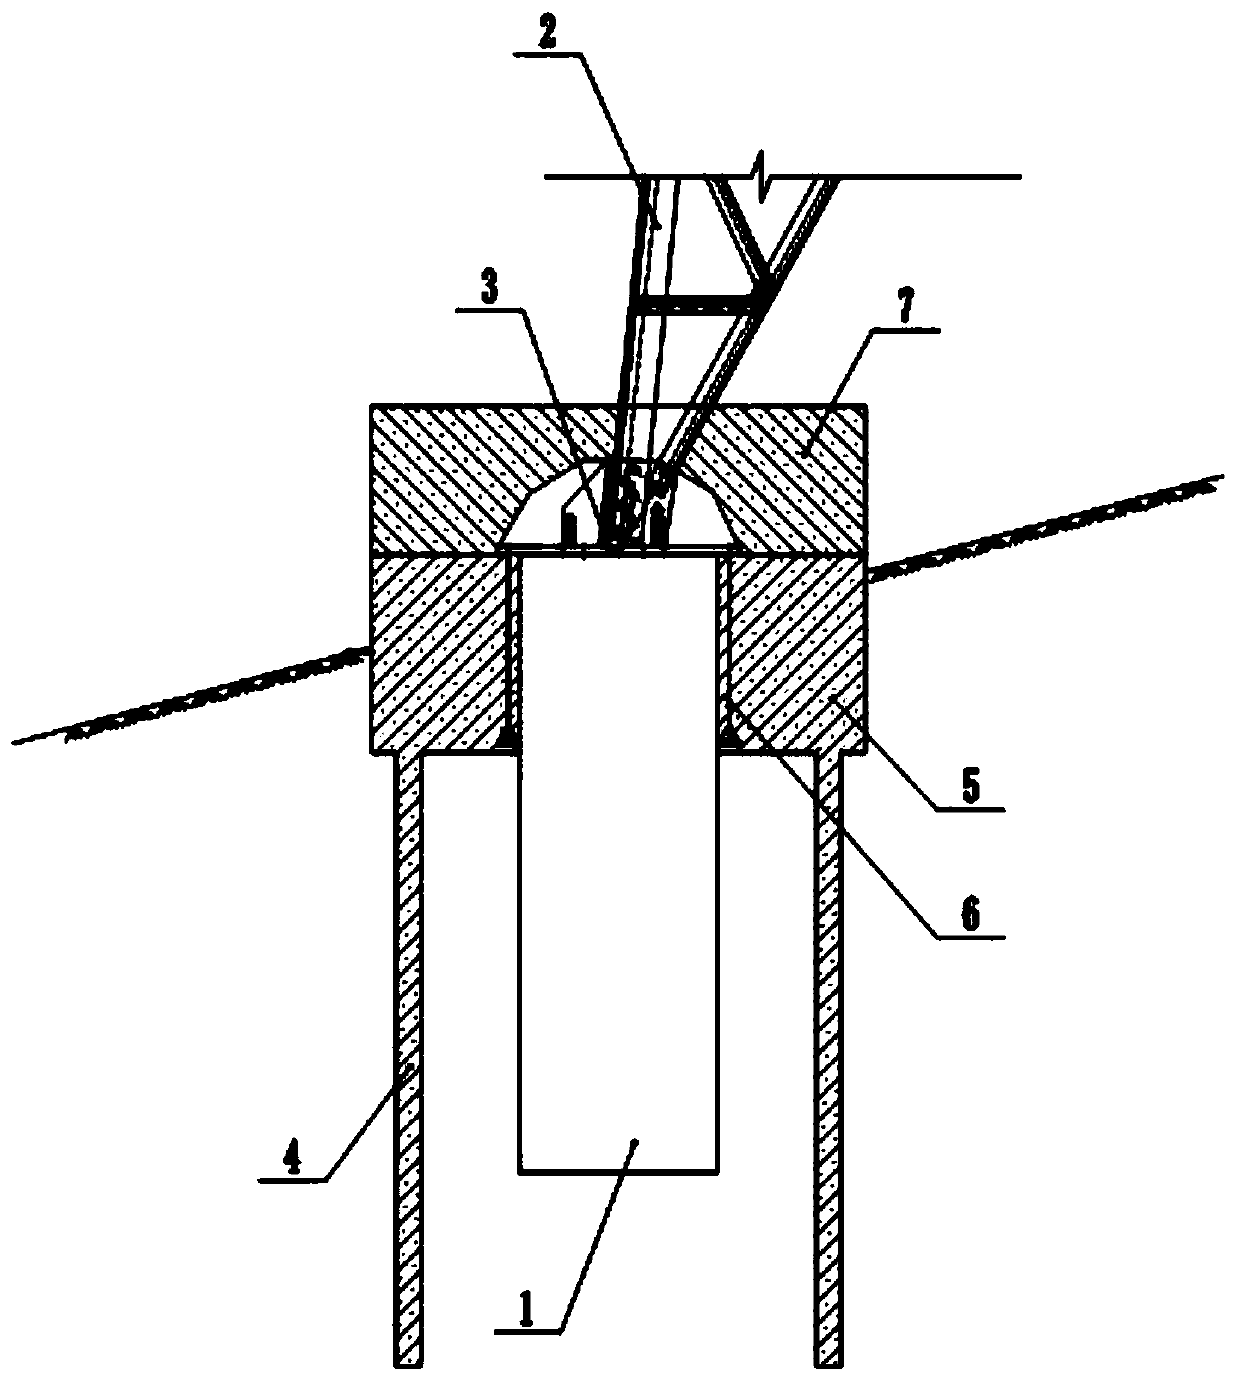 Integral reinforcing device and method for transmission tower base and component